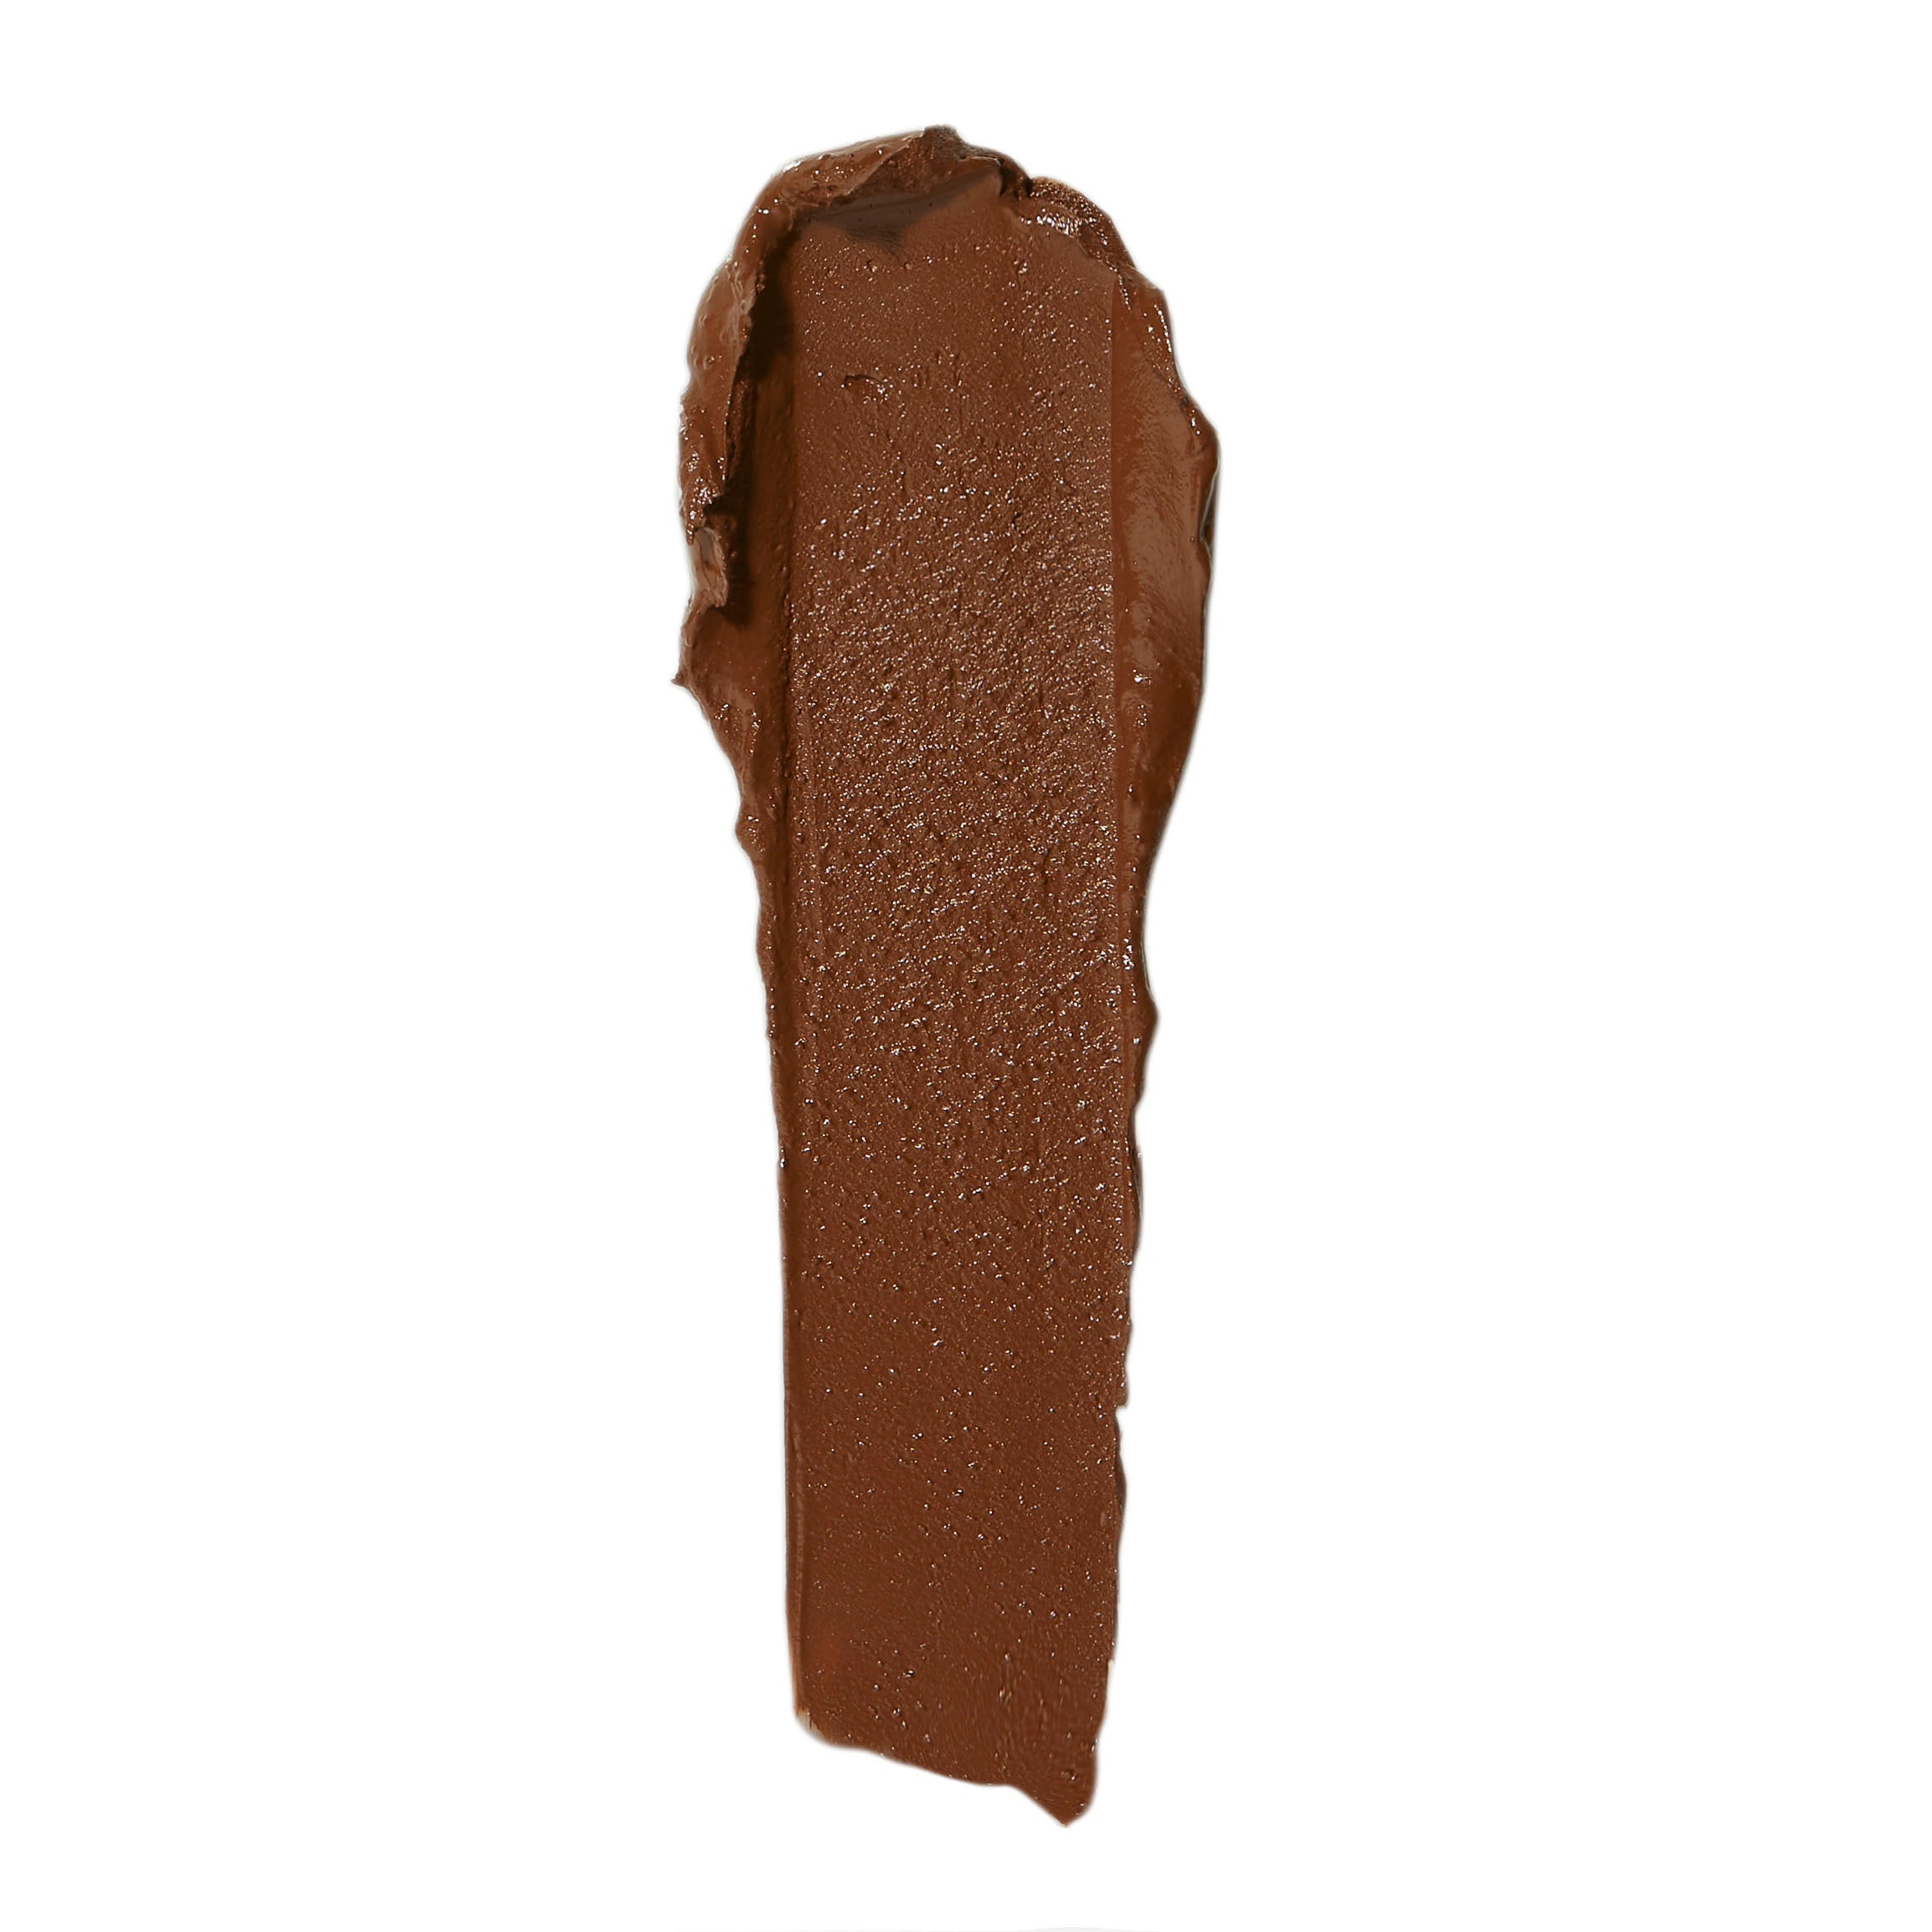 Blunder Cover an All-In-One Foundation/Concealer Shade - Sieben.5 - 1